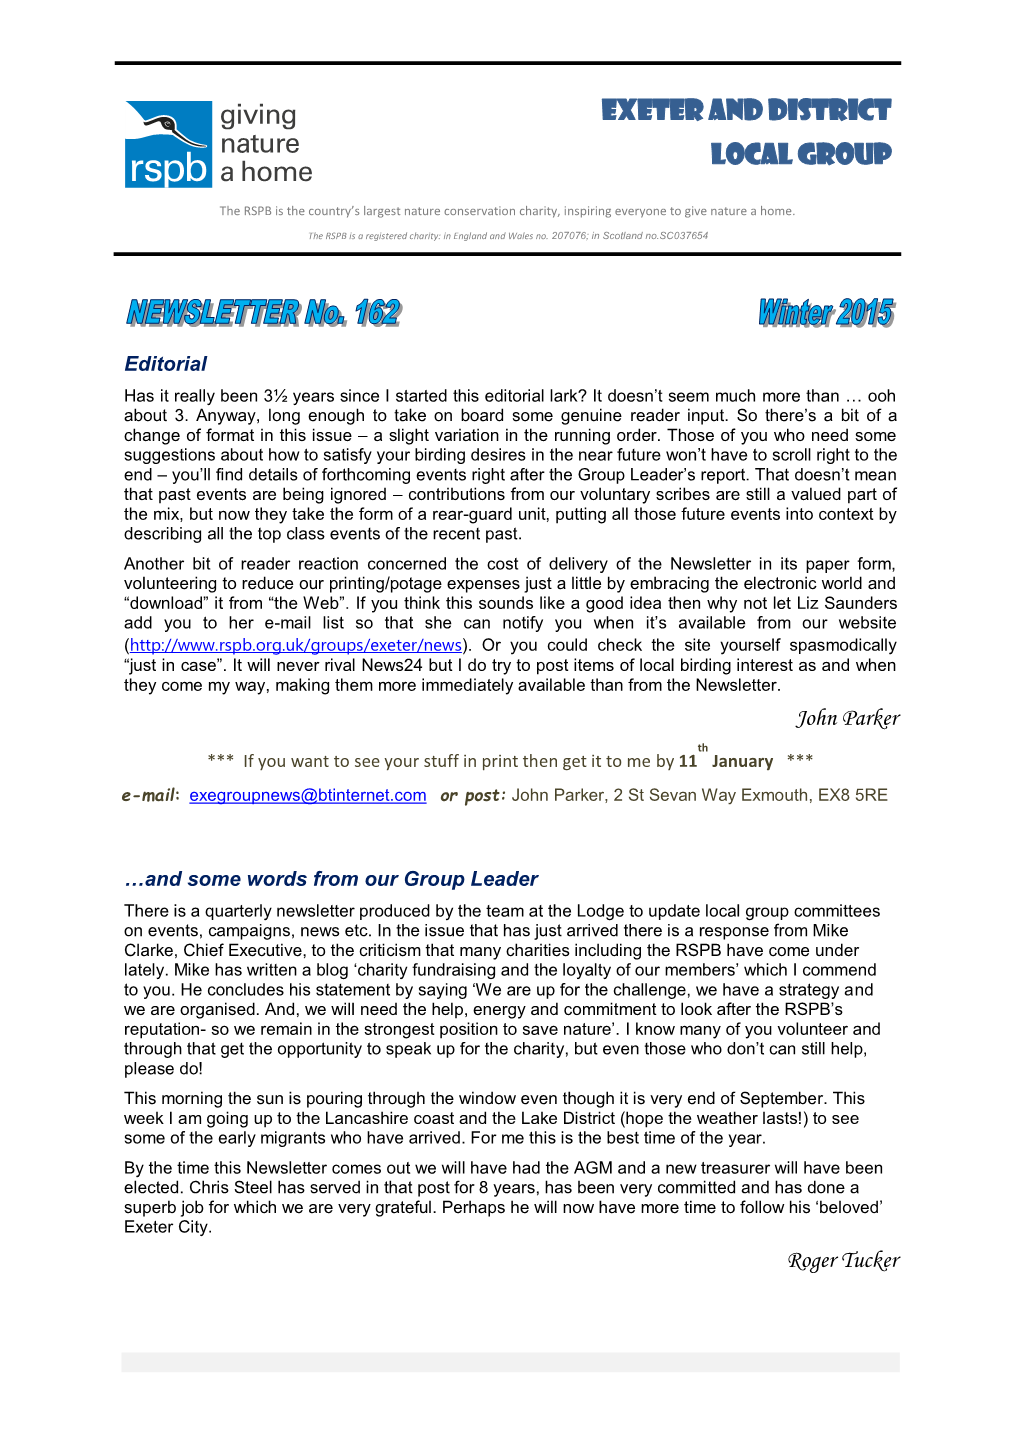 Exeter and District Local Group Newsletter No